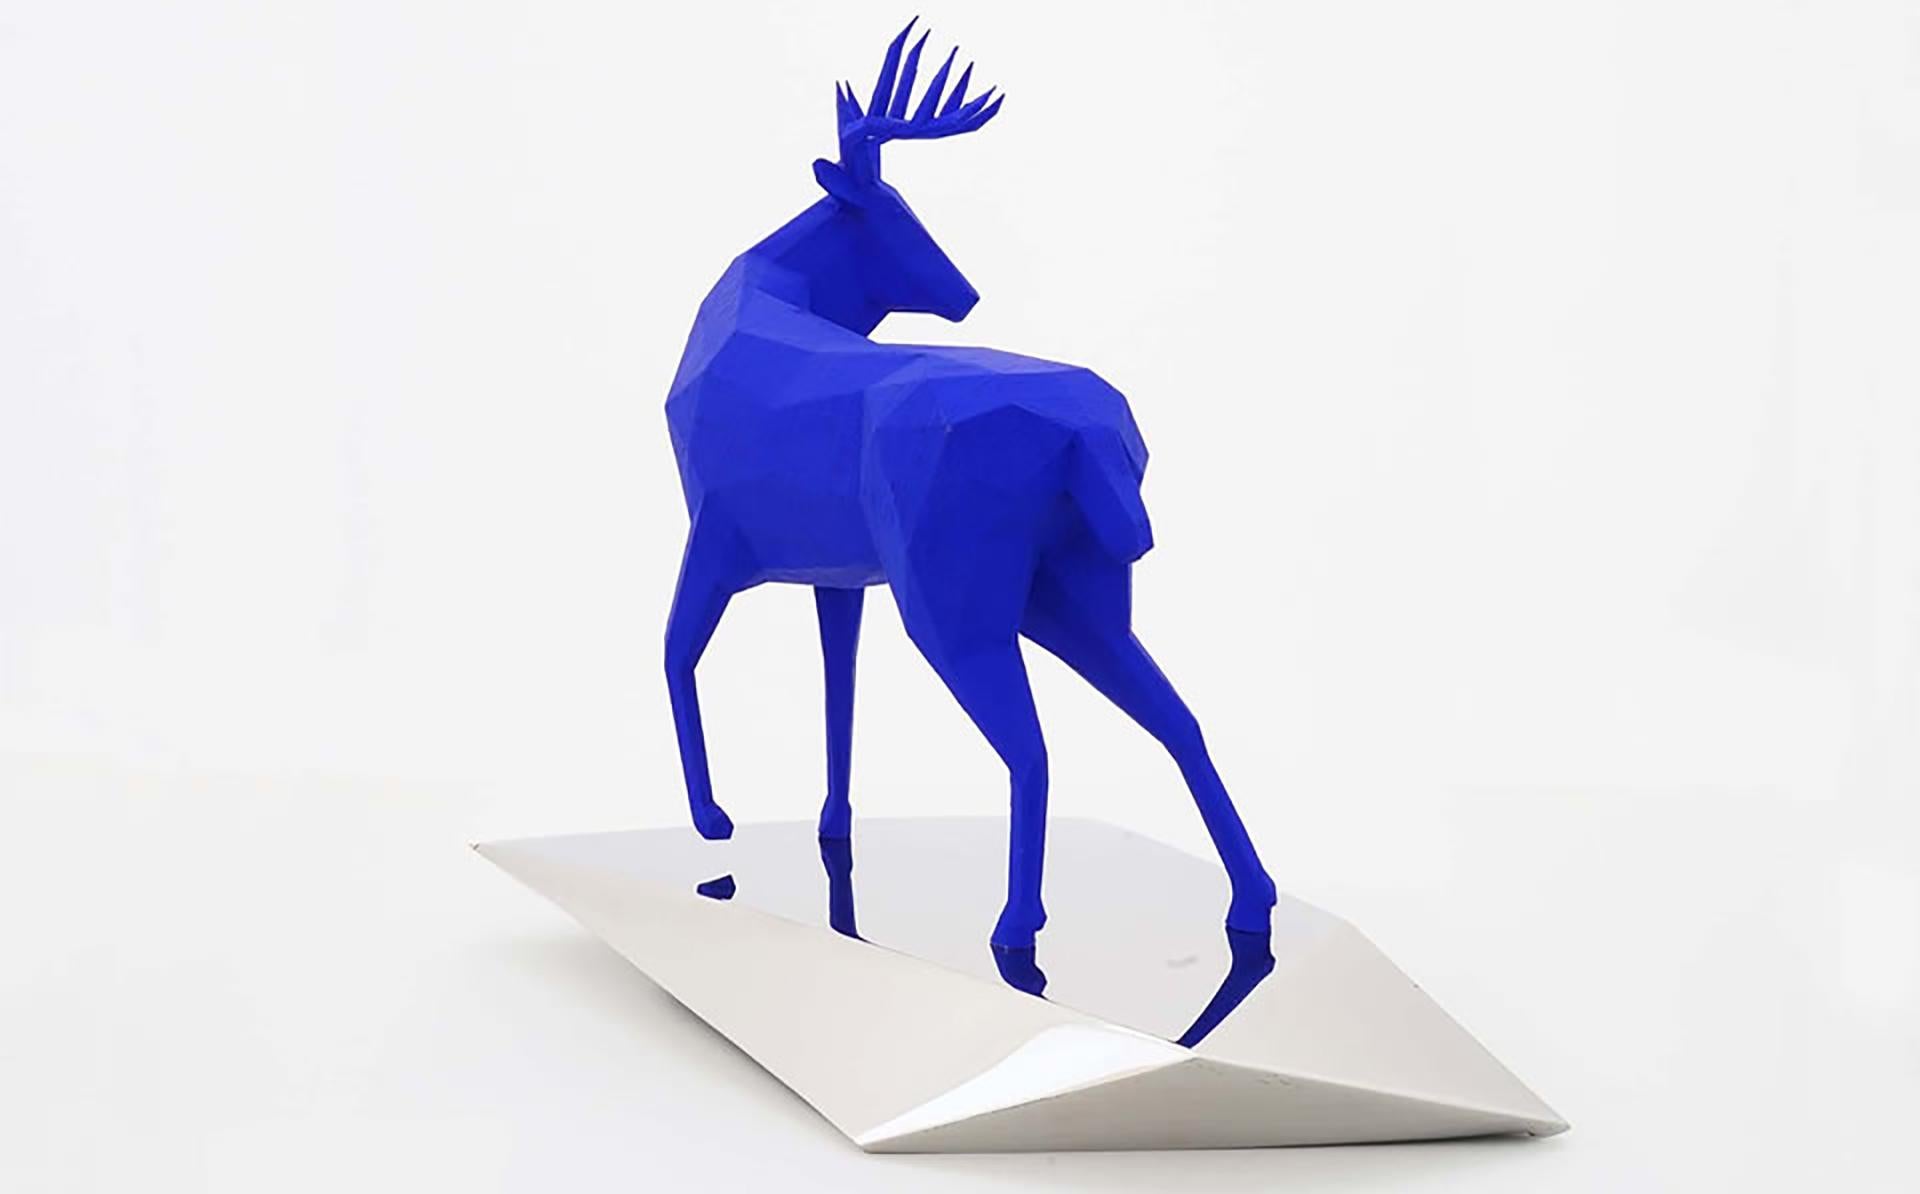 TITLE: Oops
ARTIST: Daniele Basso
YEAR: 2022
MEDIUM TYPE: Sculpture
MEDIUM/MATERIALS: Stainless steel mirror finished by hands and resin blue
DIMENSIONS: 32 x 18 x h 27 cm
WEIGHT: 3 kg

Surprisingly, behind a tree, the deer appears ... and we appear